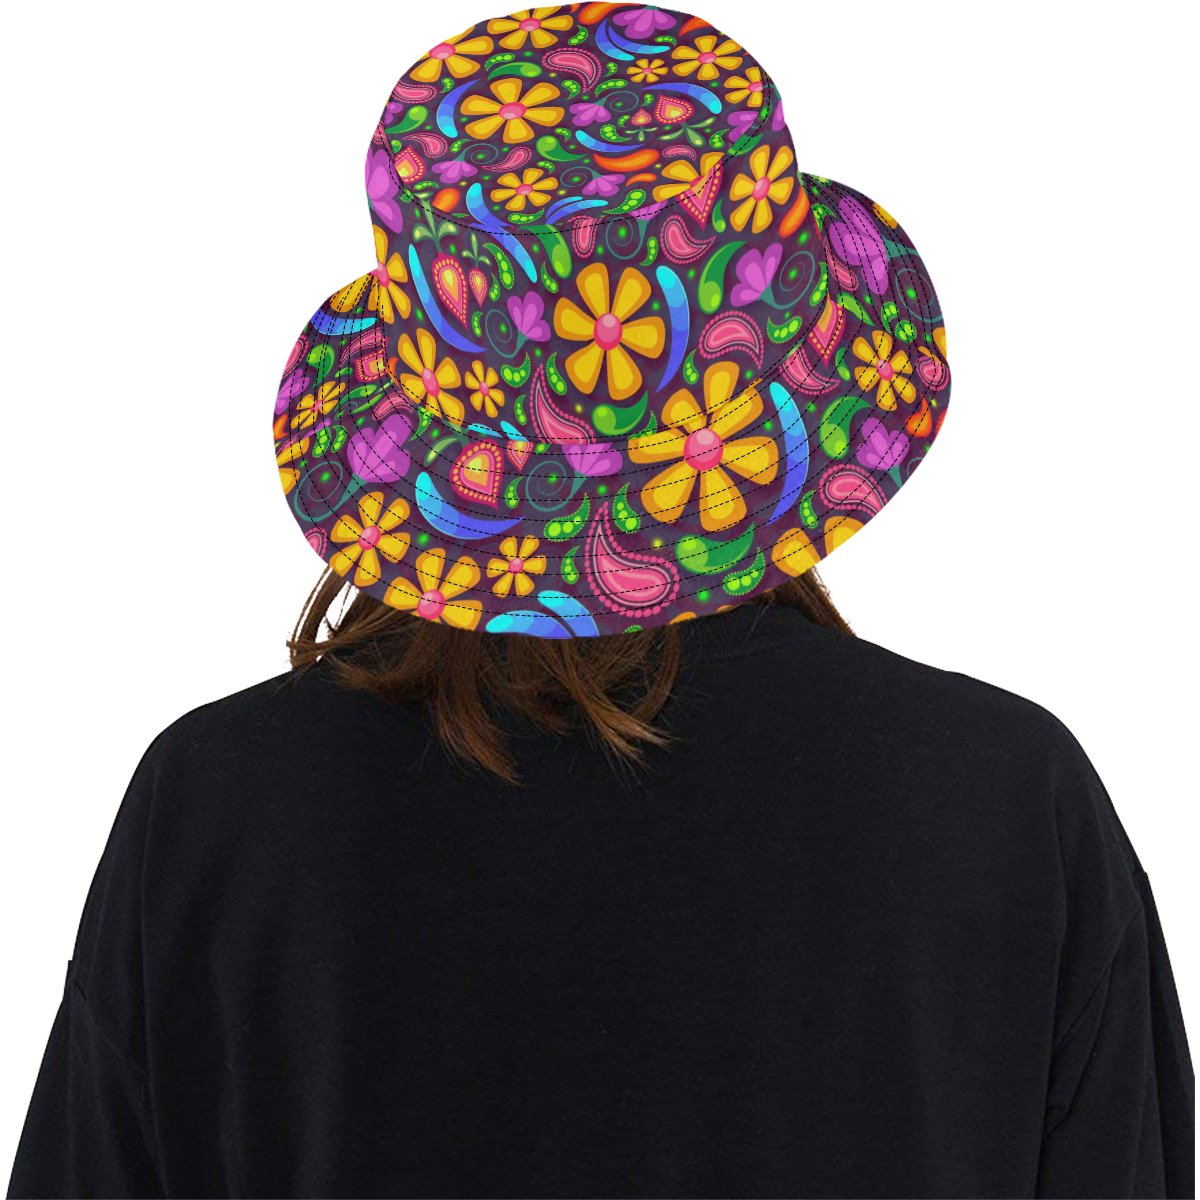 Colorful Retro Flowers All Over Print Bucket Hat